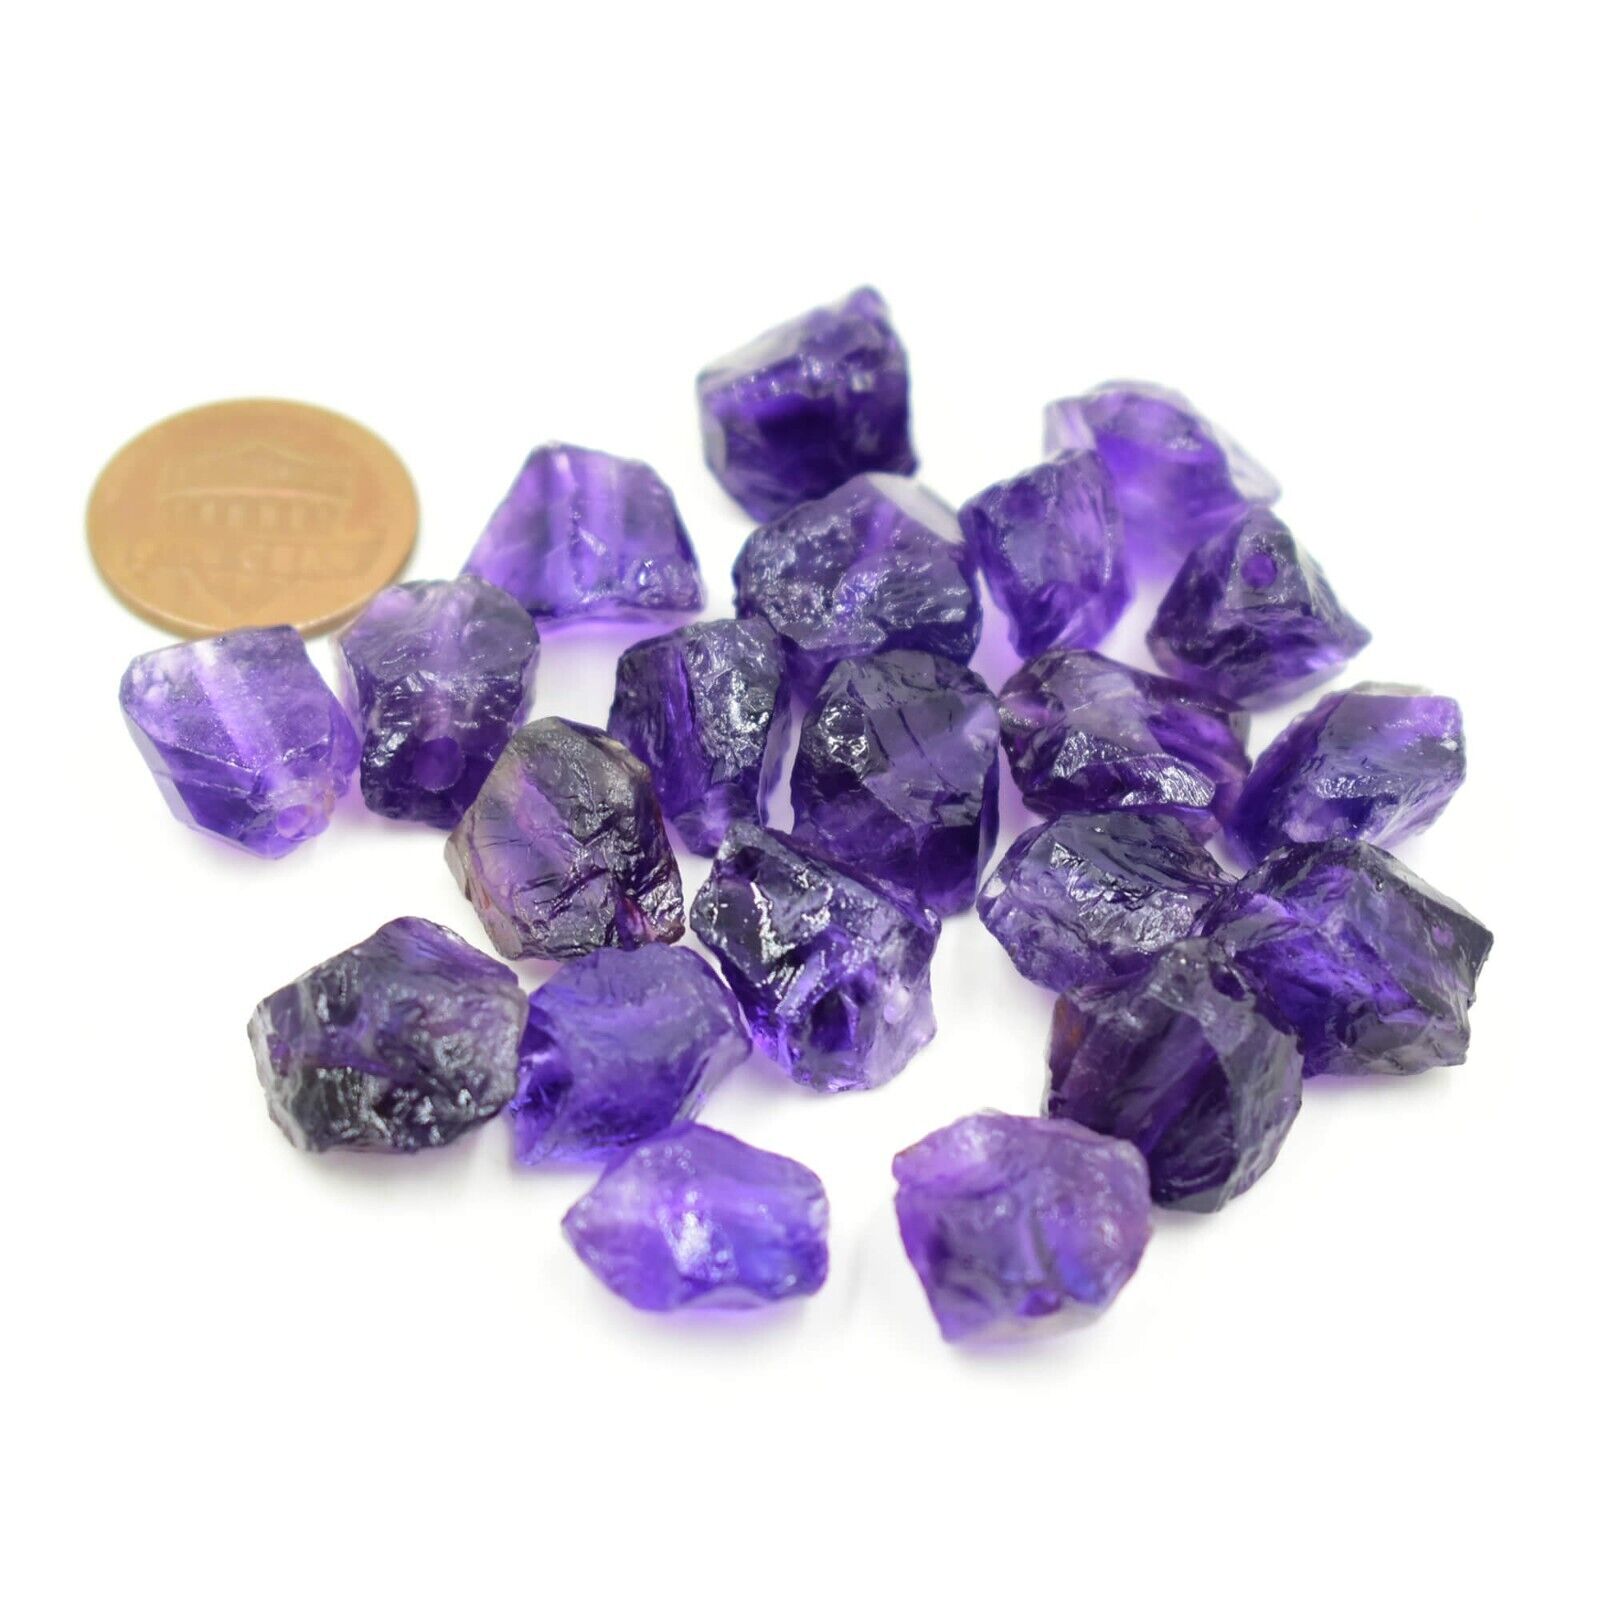 Natural African Amethyst Rough Loose Stone Raw Stone 10 to 15mm Wholesale Lots